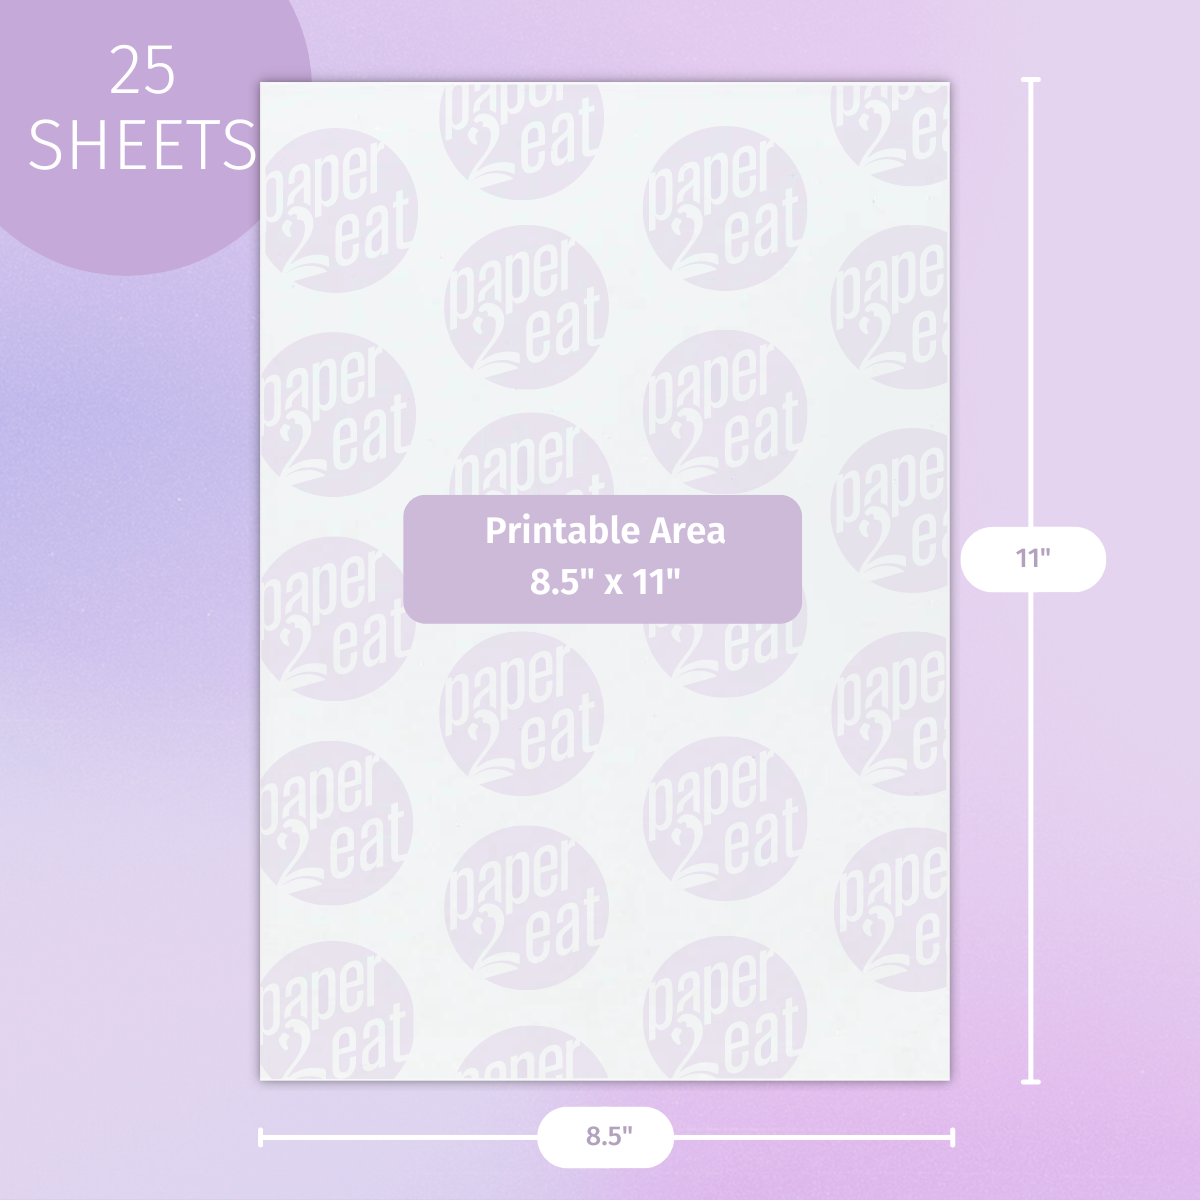 Combo 3 - Miracle Transfer Sheets + Wafer Paper